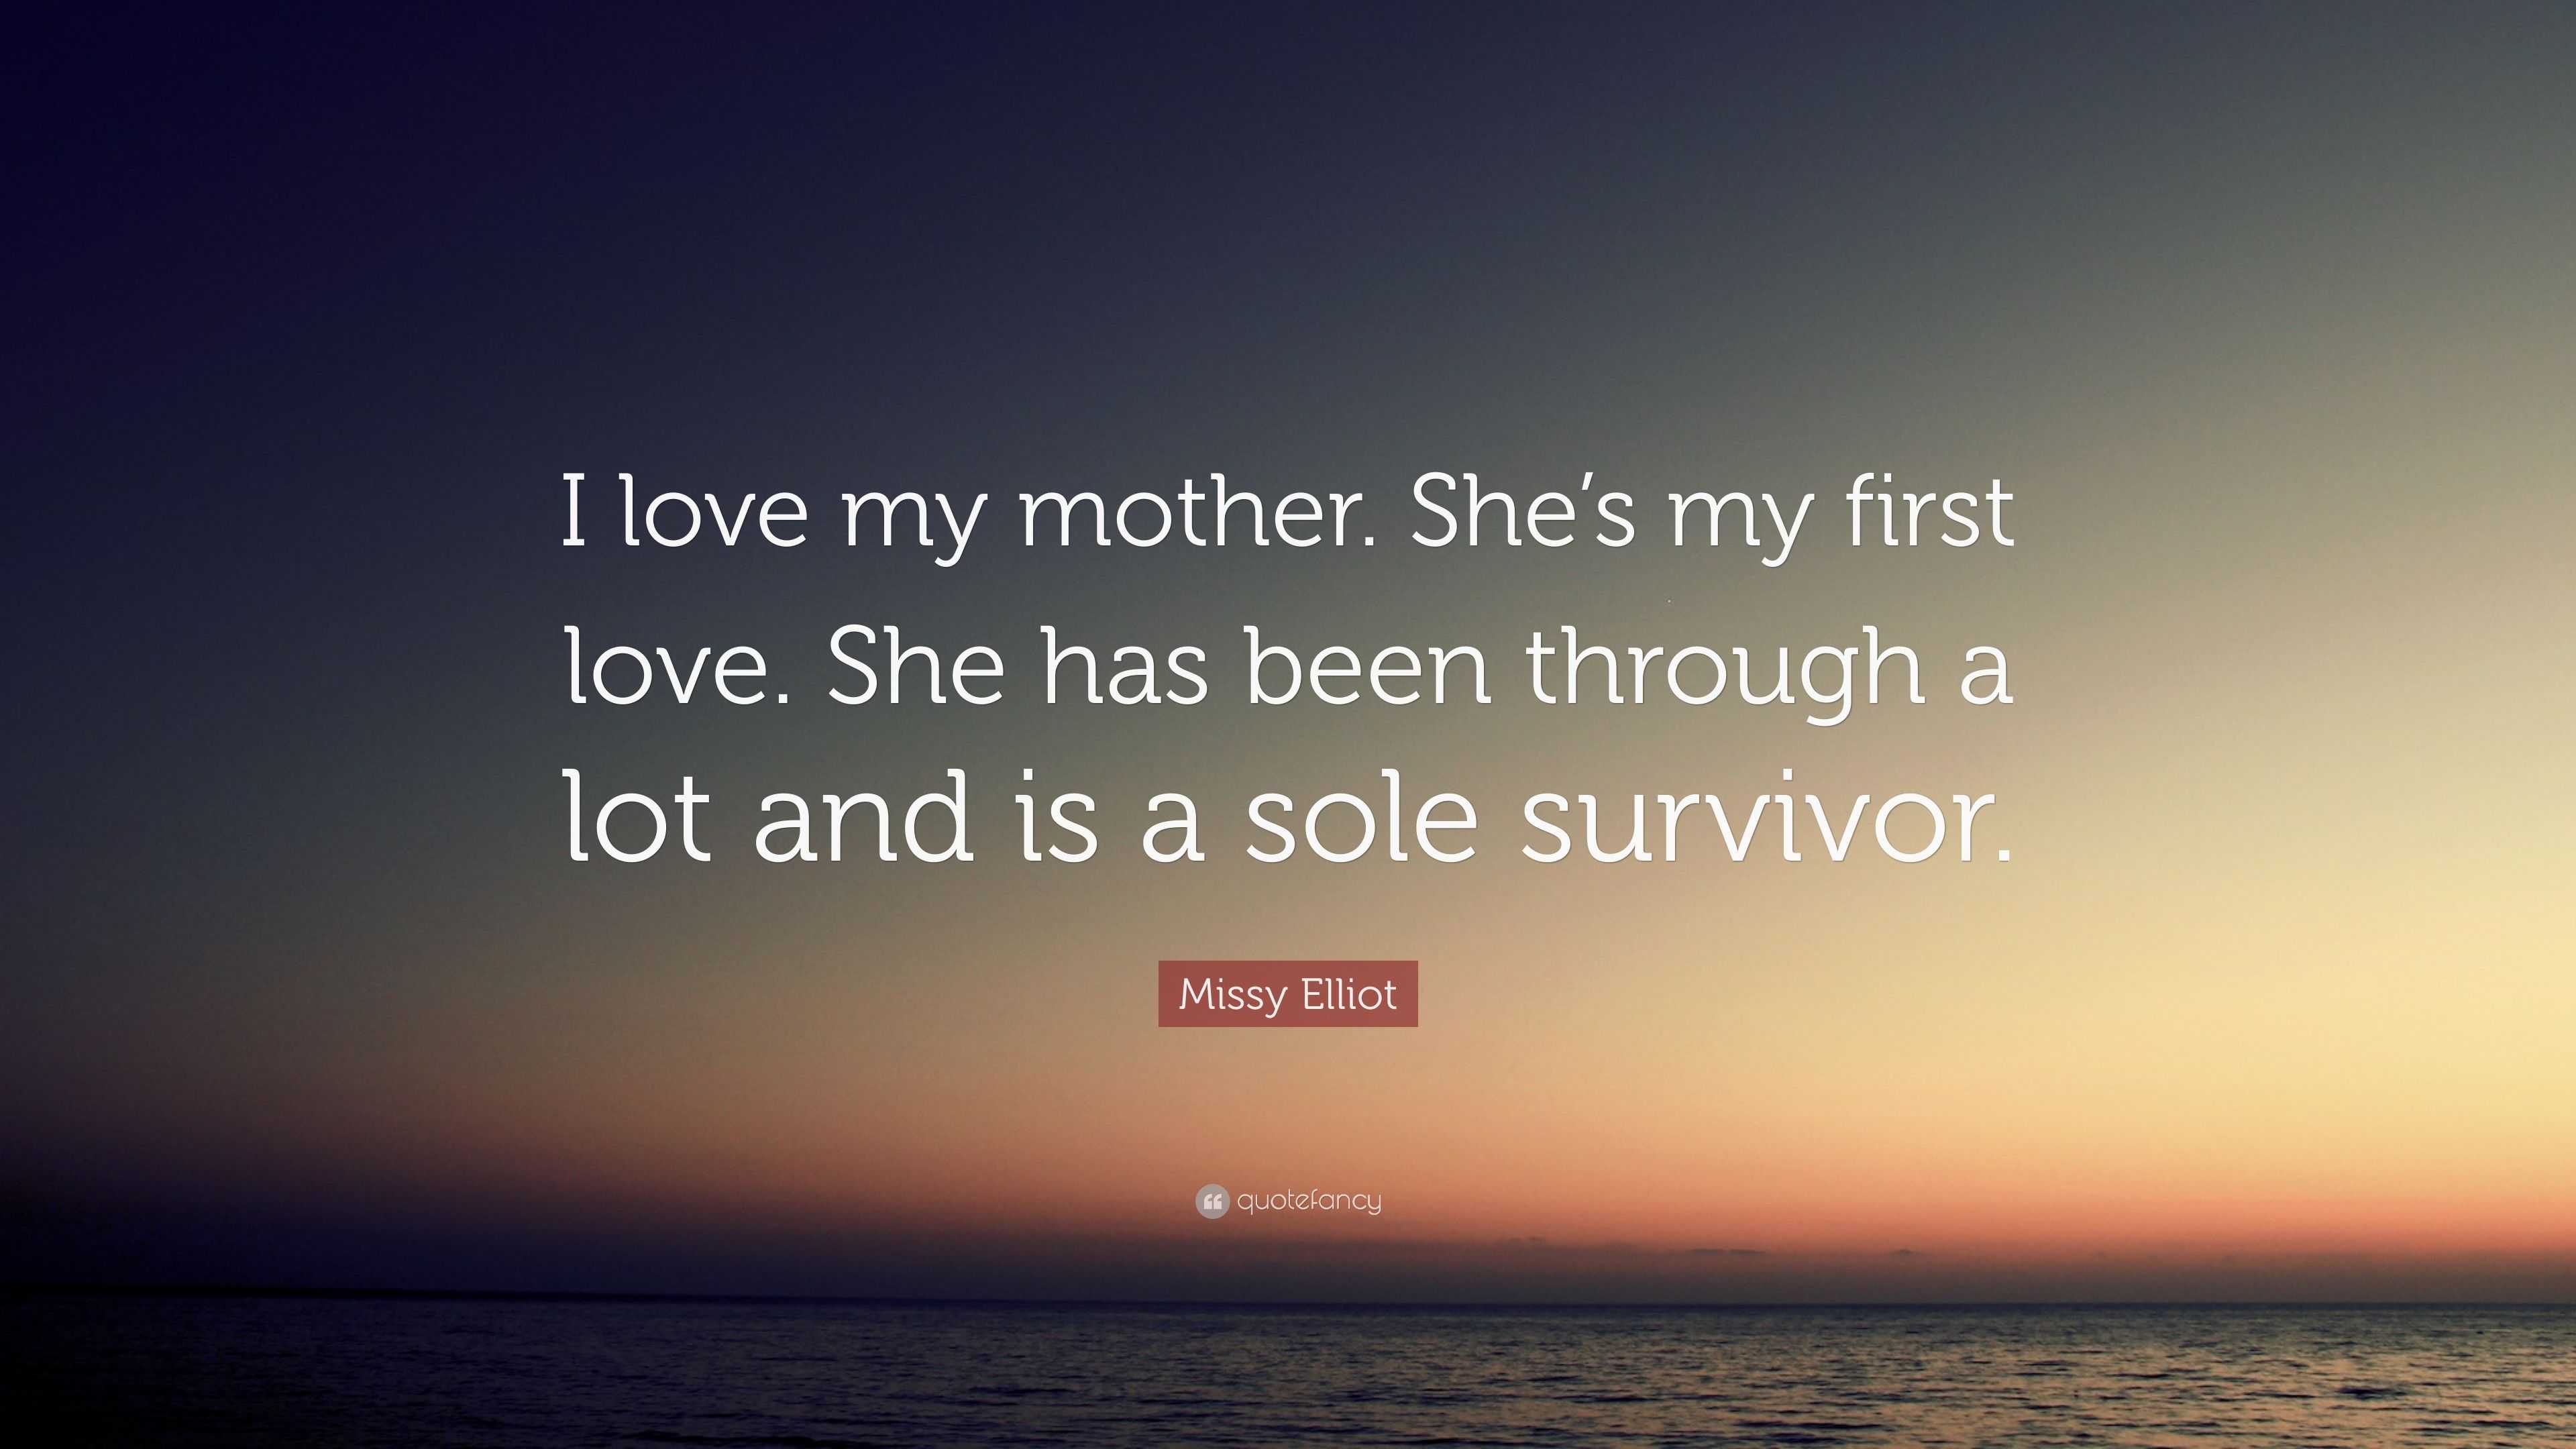 Missy Elliot Quote “I love my mother She s my first love She